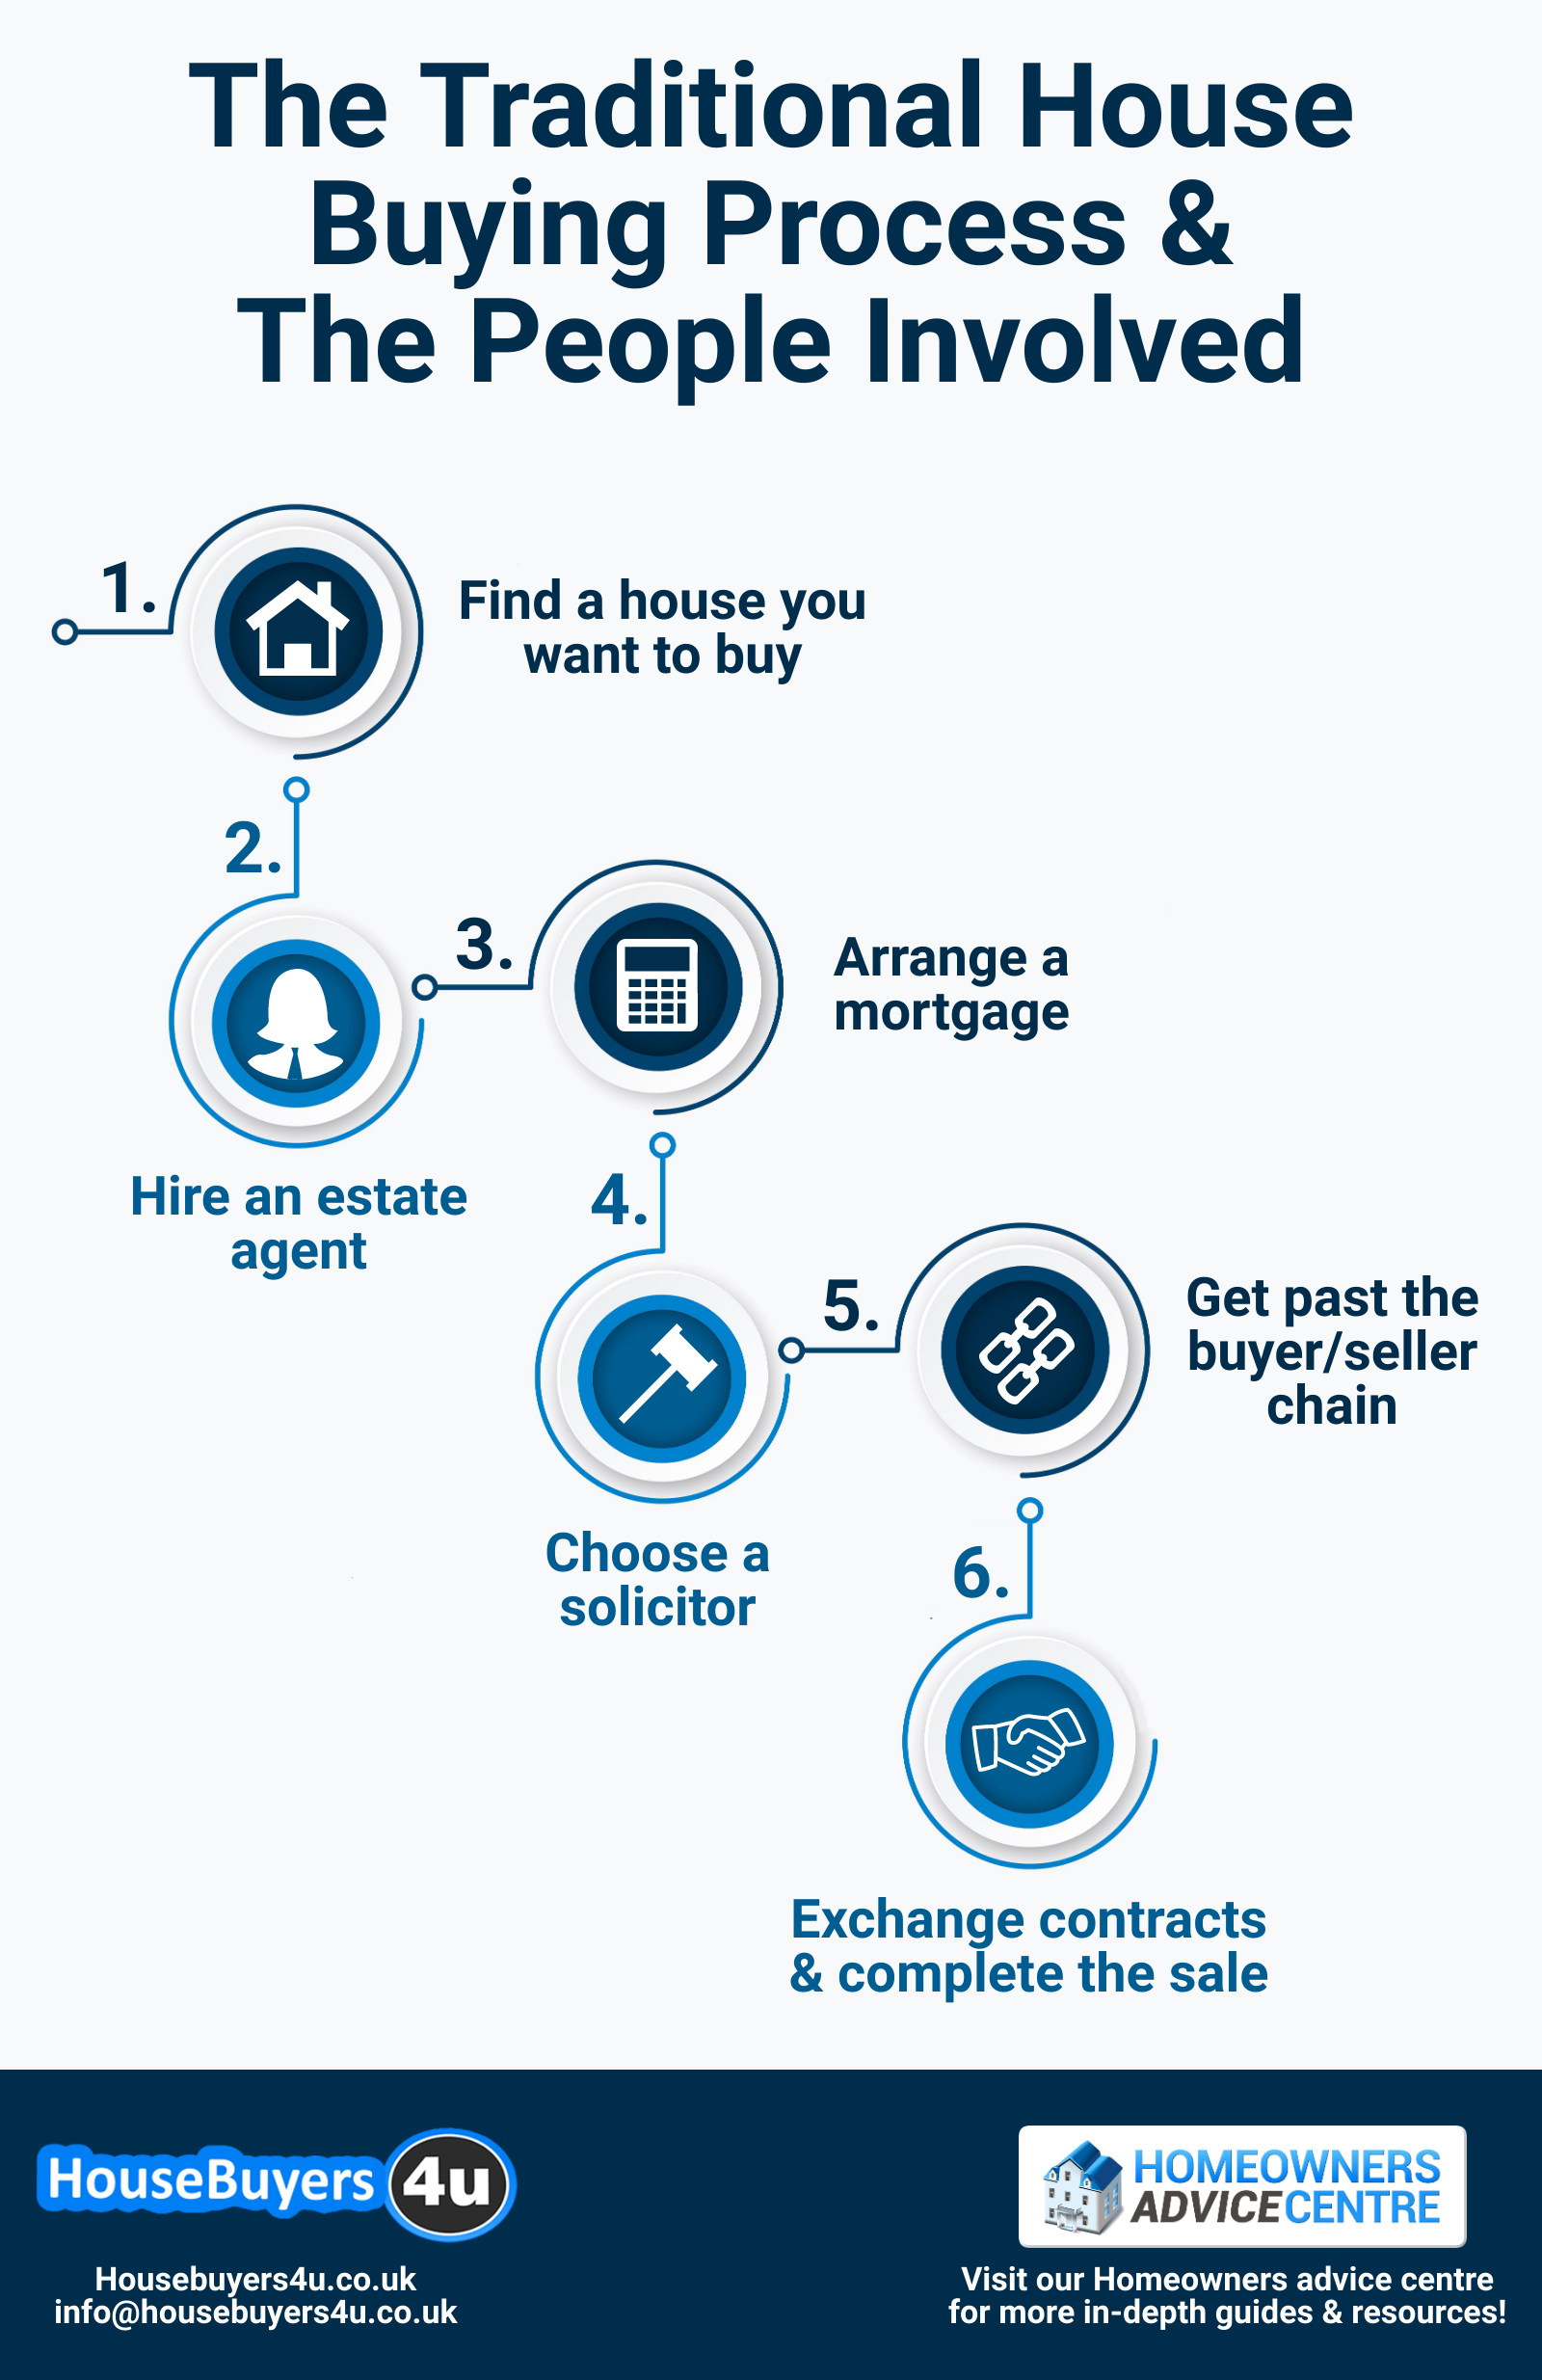 The traditional house buying process and the people involved